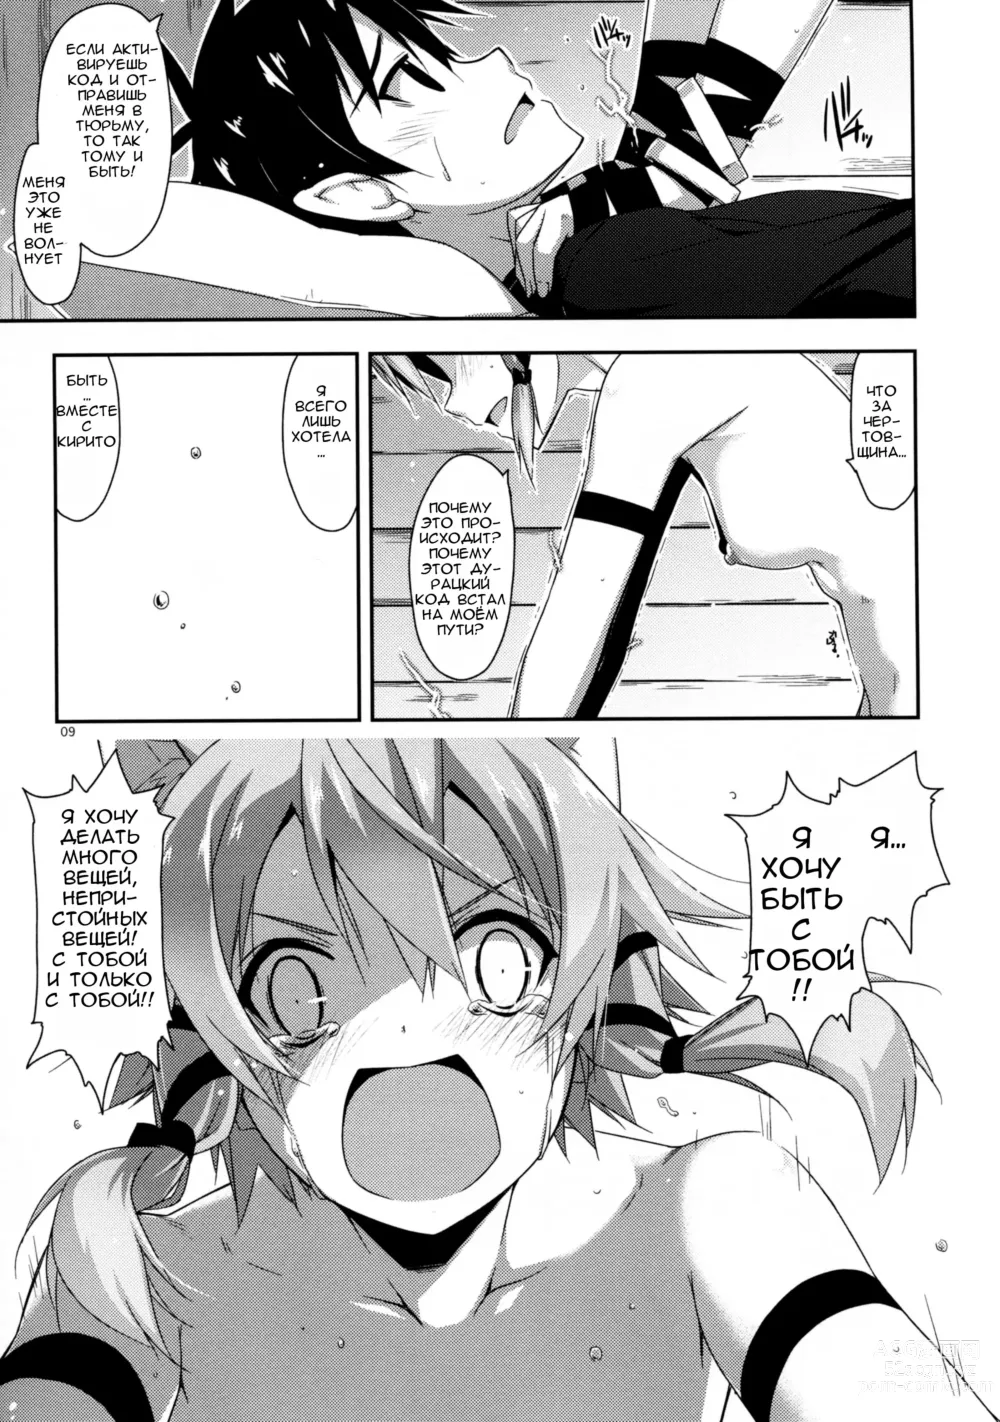 Page 9 of doujinshi Case closed.